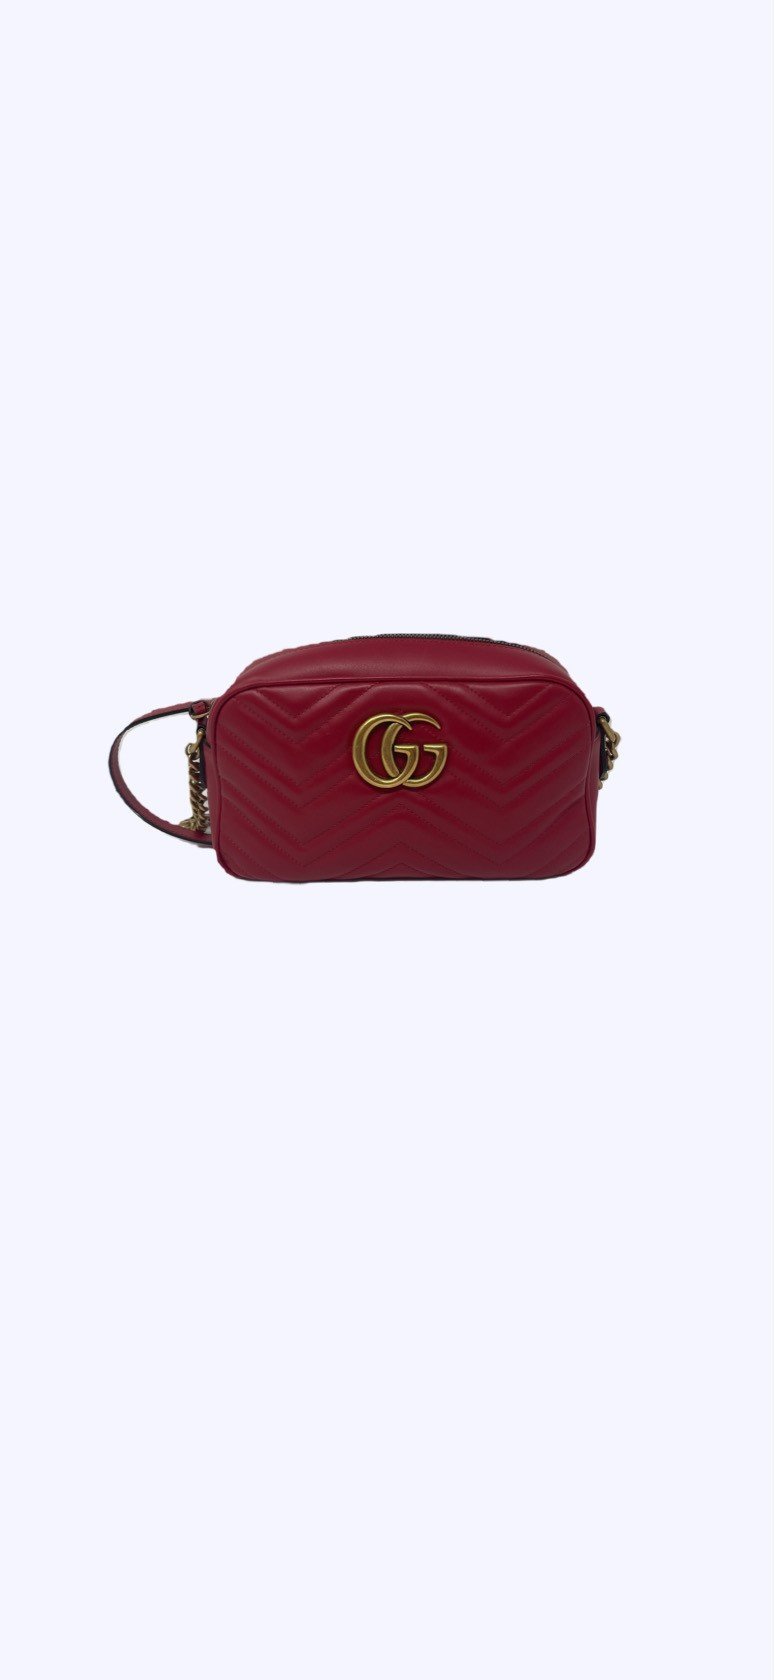 Gucci 1973 Chain Shoulder Bag Leather Small Red | eBay